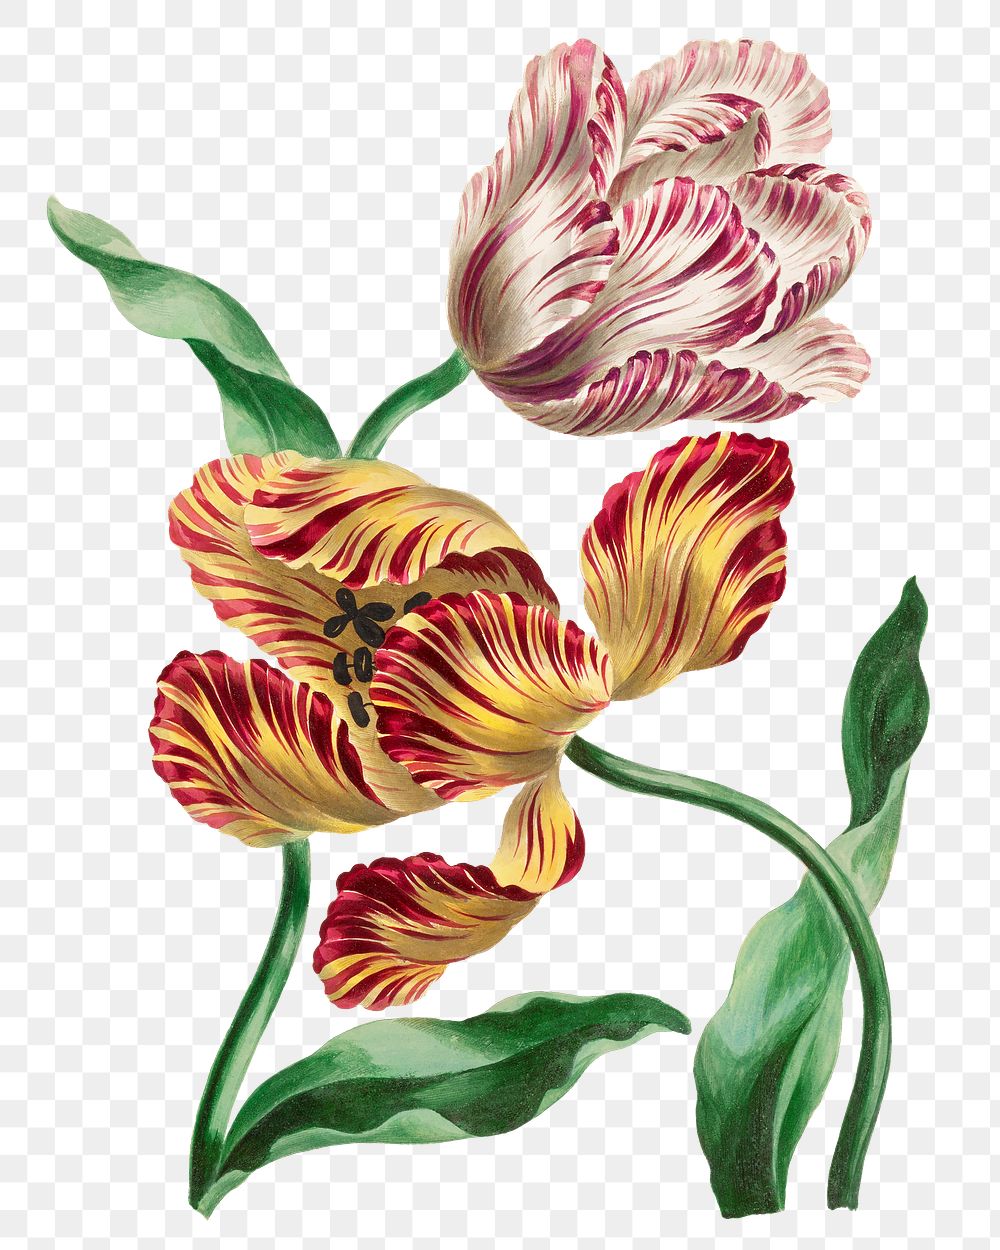 Tulips png floral design element, remixed from artworks by John Edwards